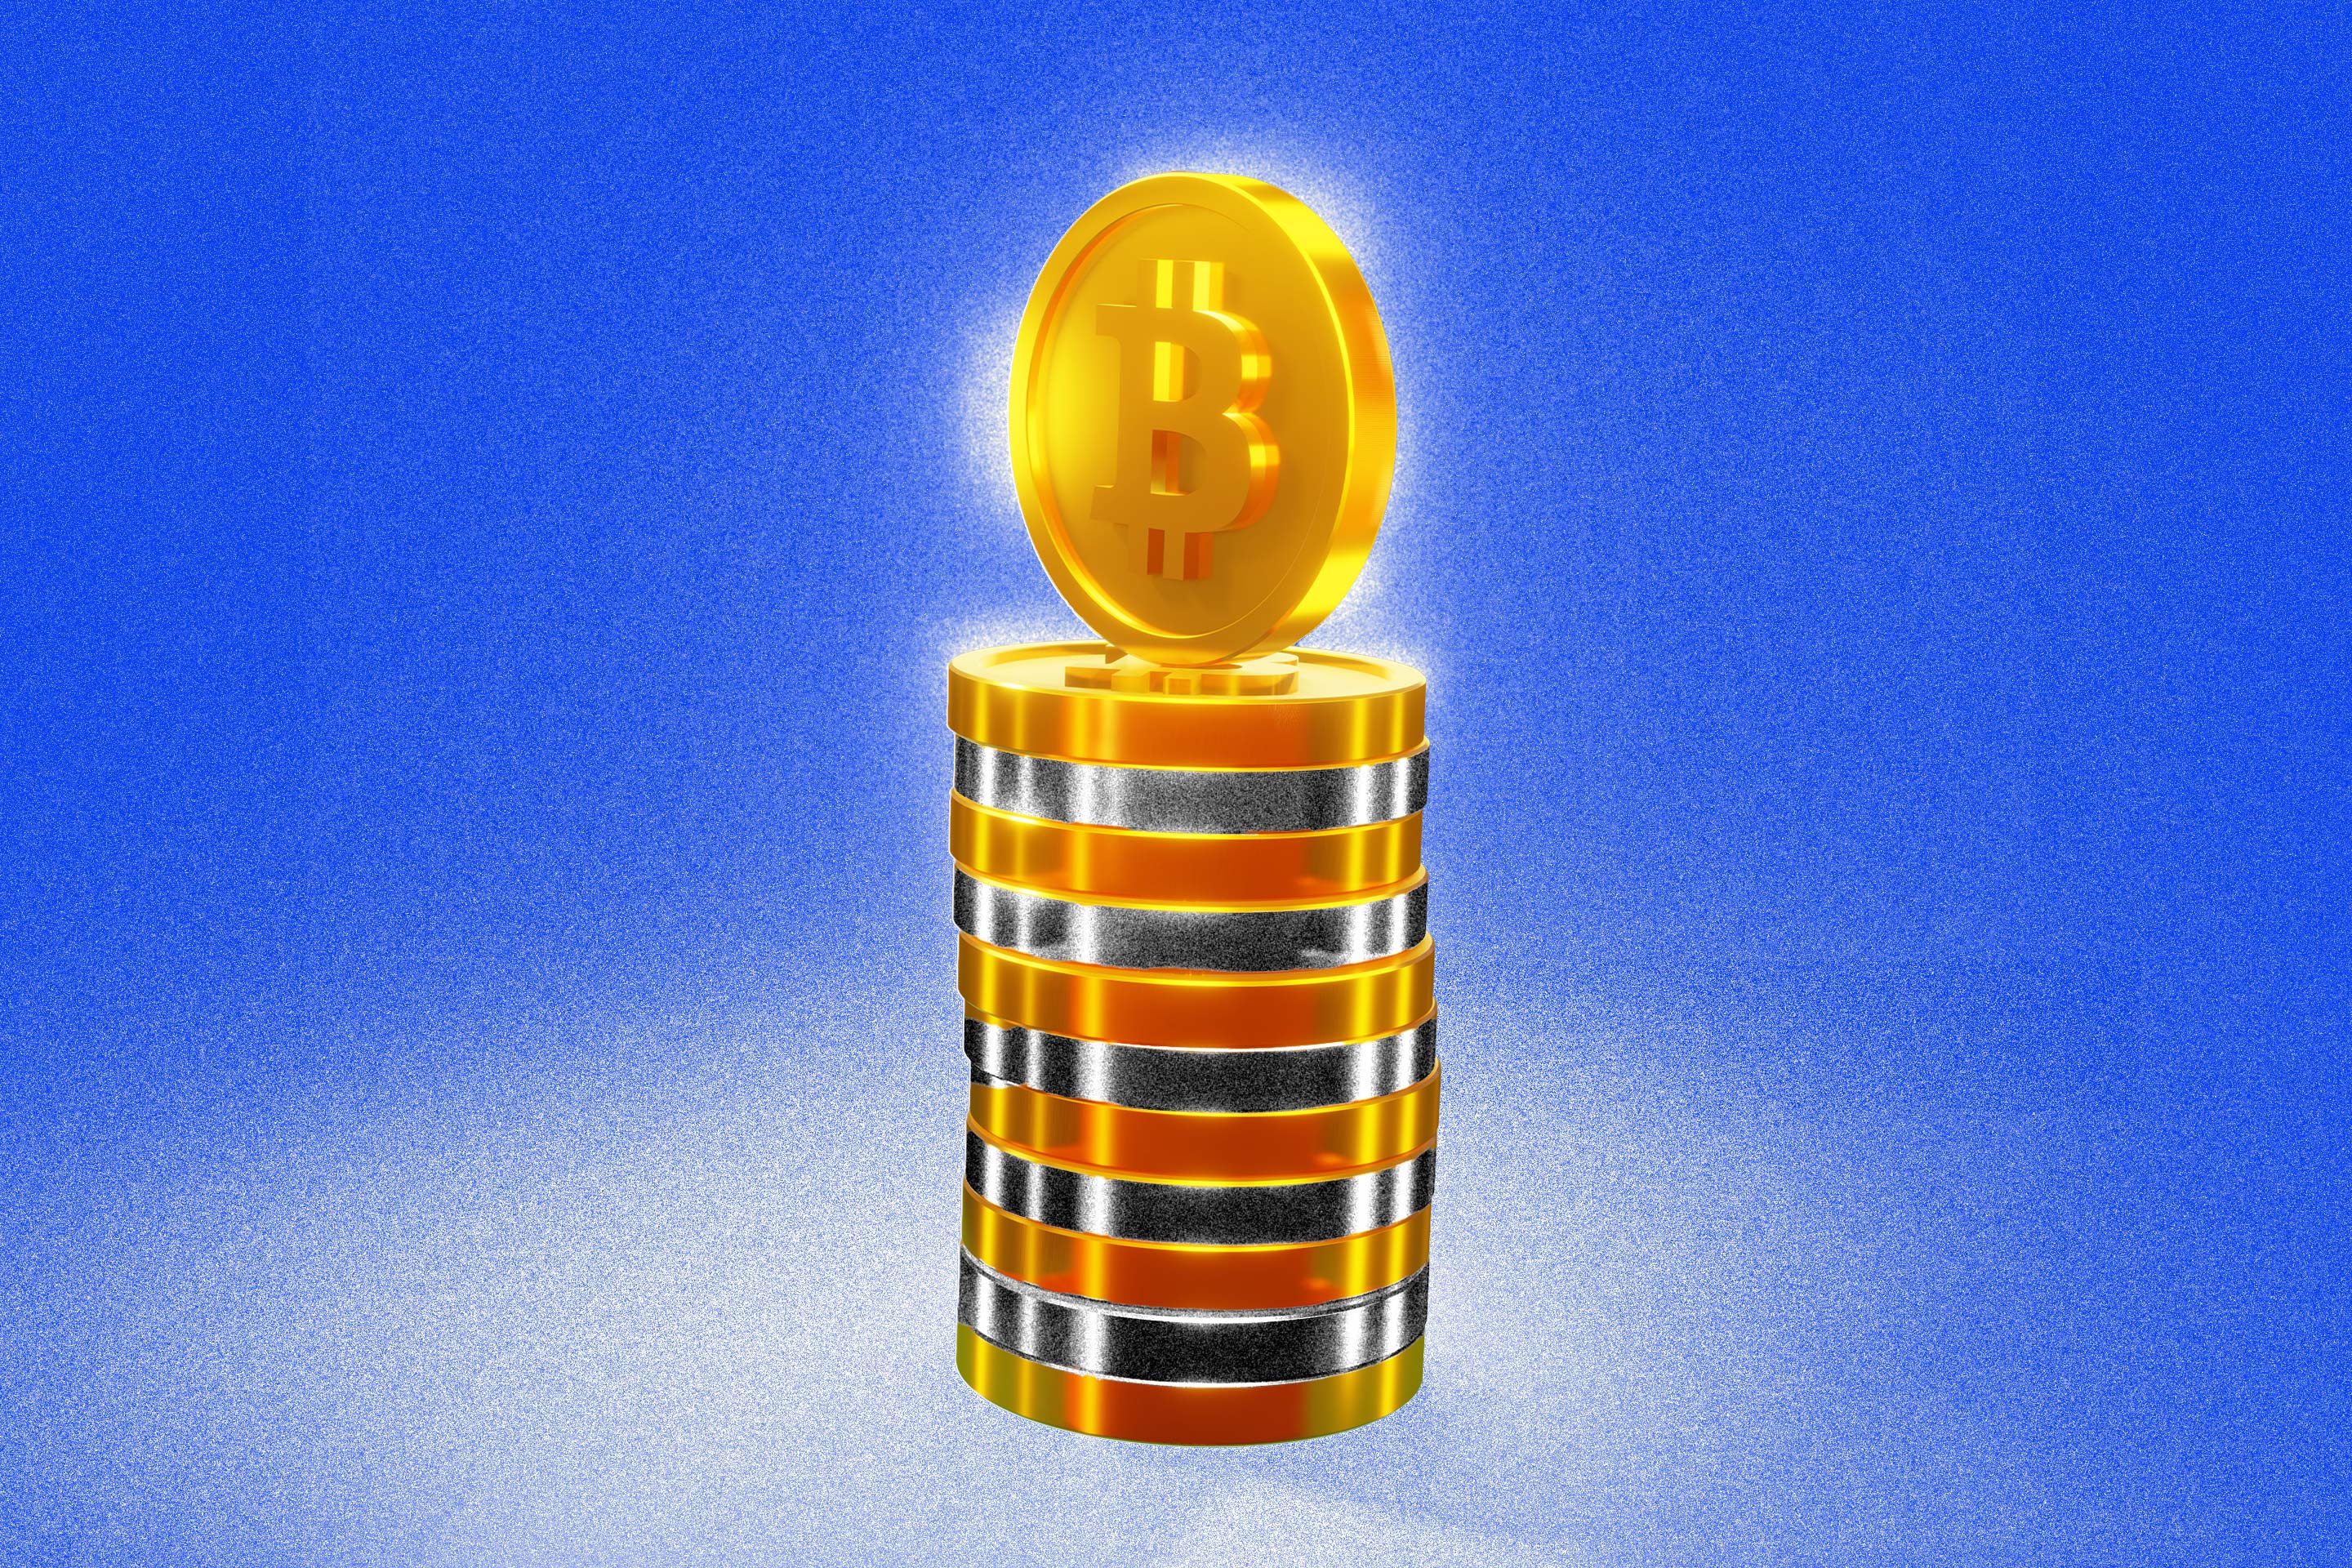 Stack of bitcoins, with half grayed out.